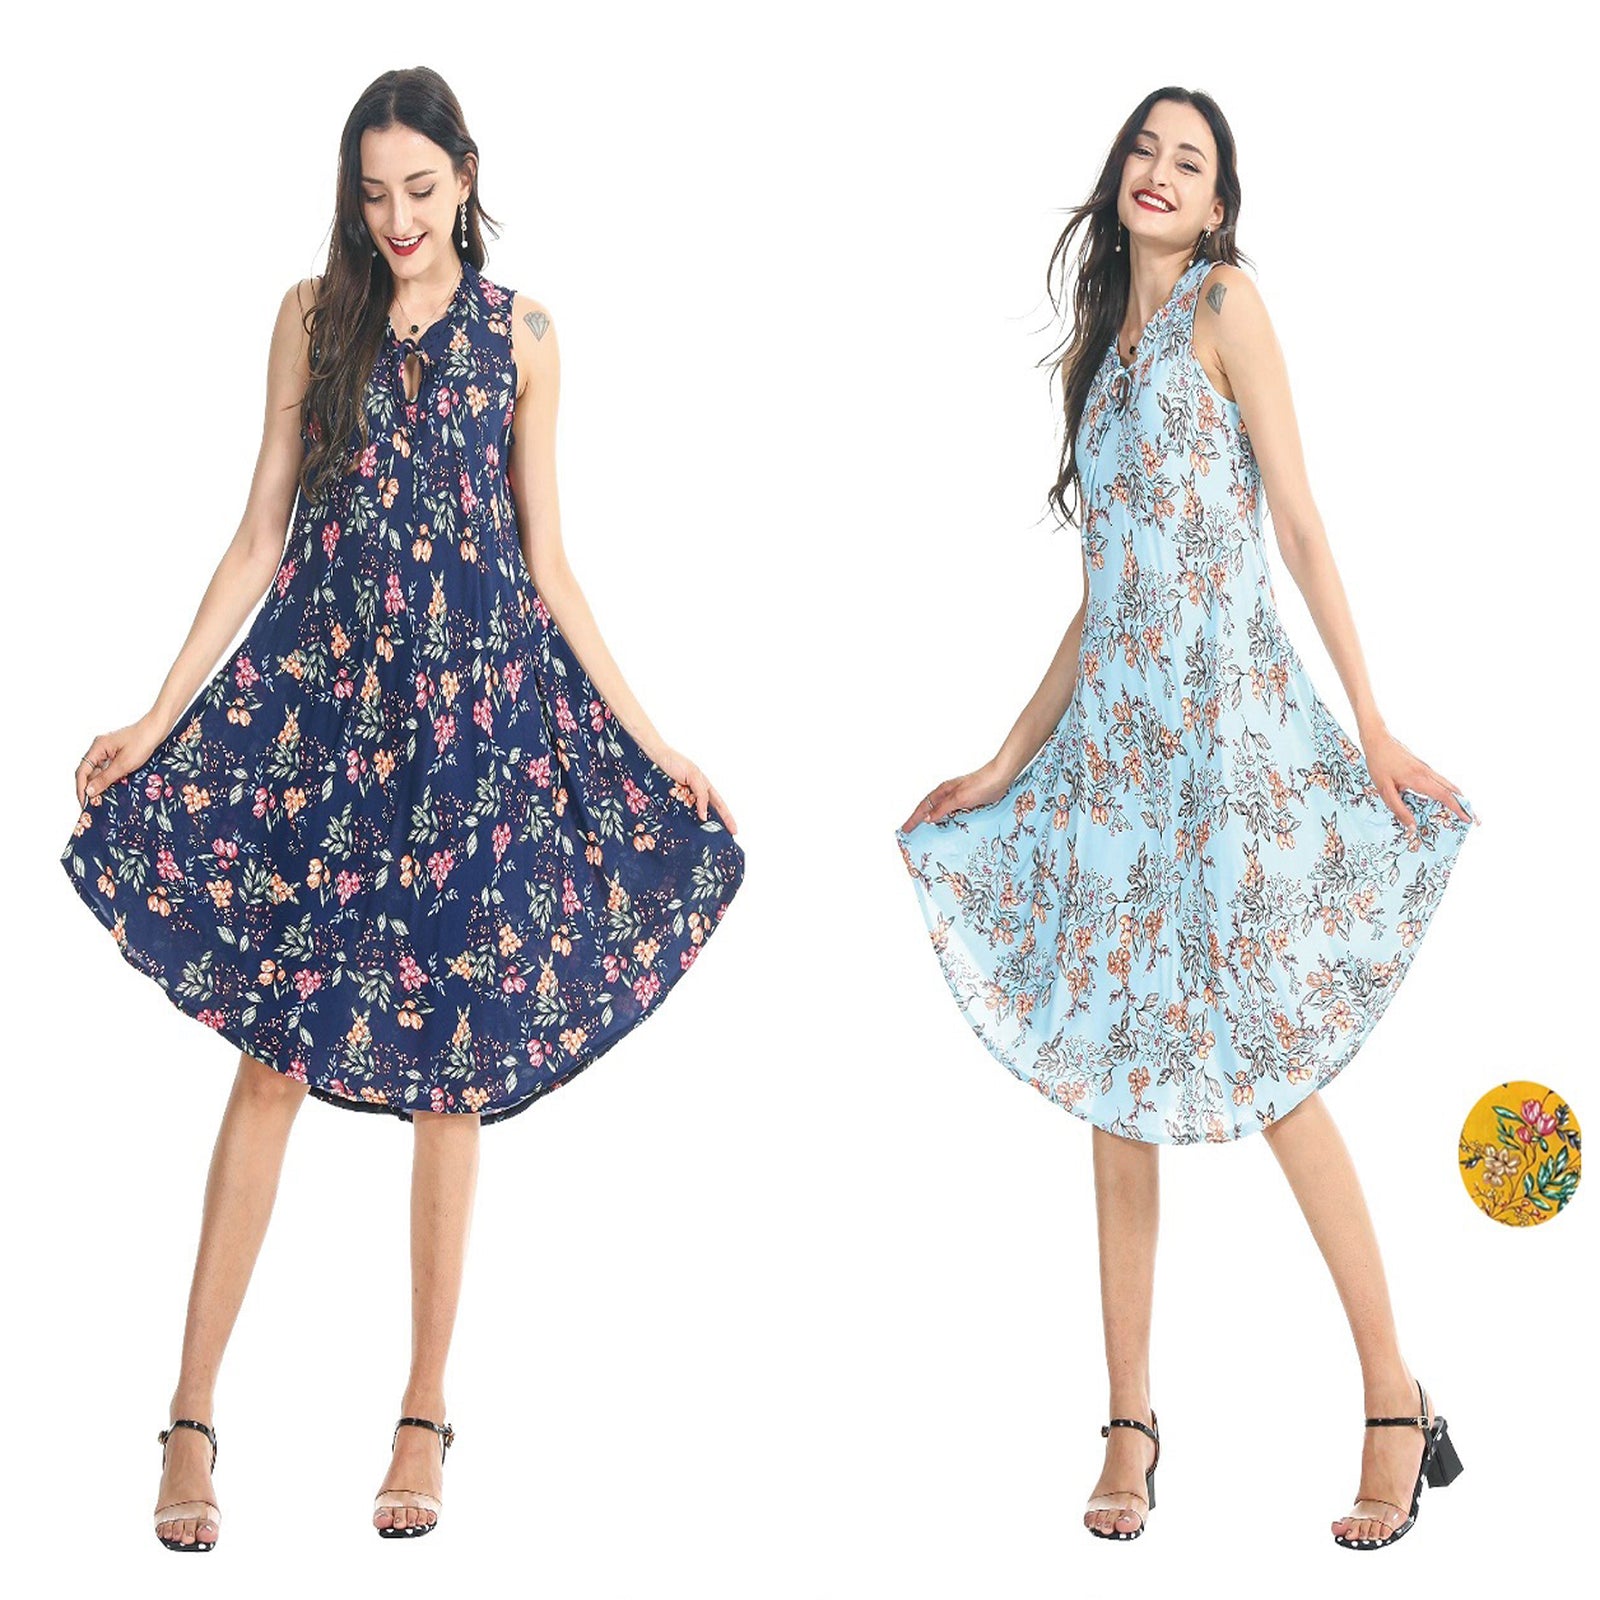 Wholesale Women's Dresses Rayon Tie-Neck Dress-Floral 6-72-Case S-XL Reyna NW39